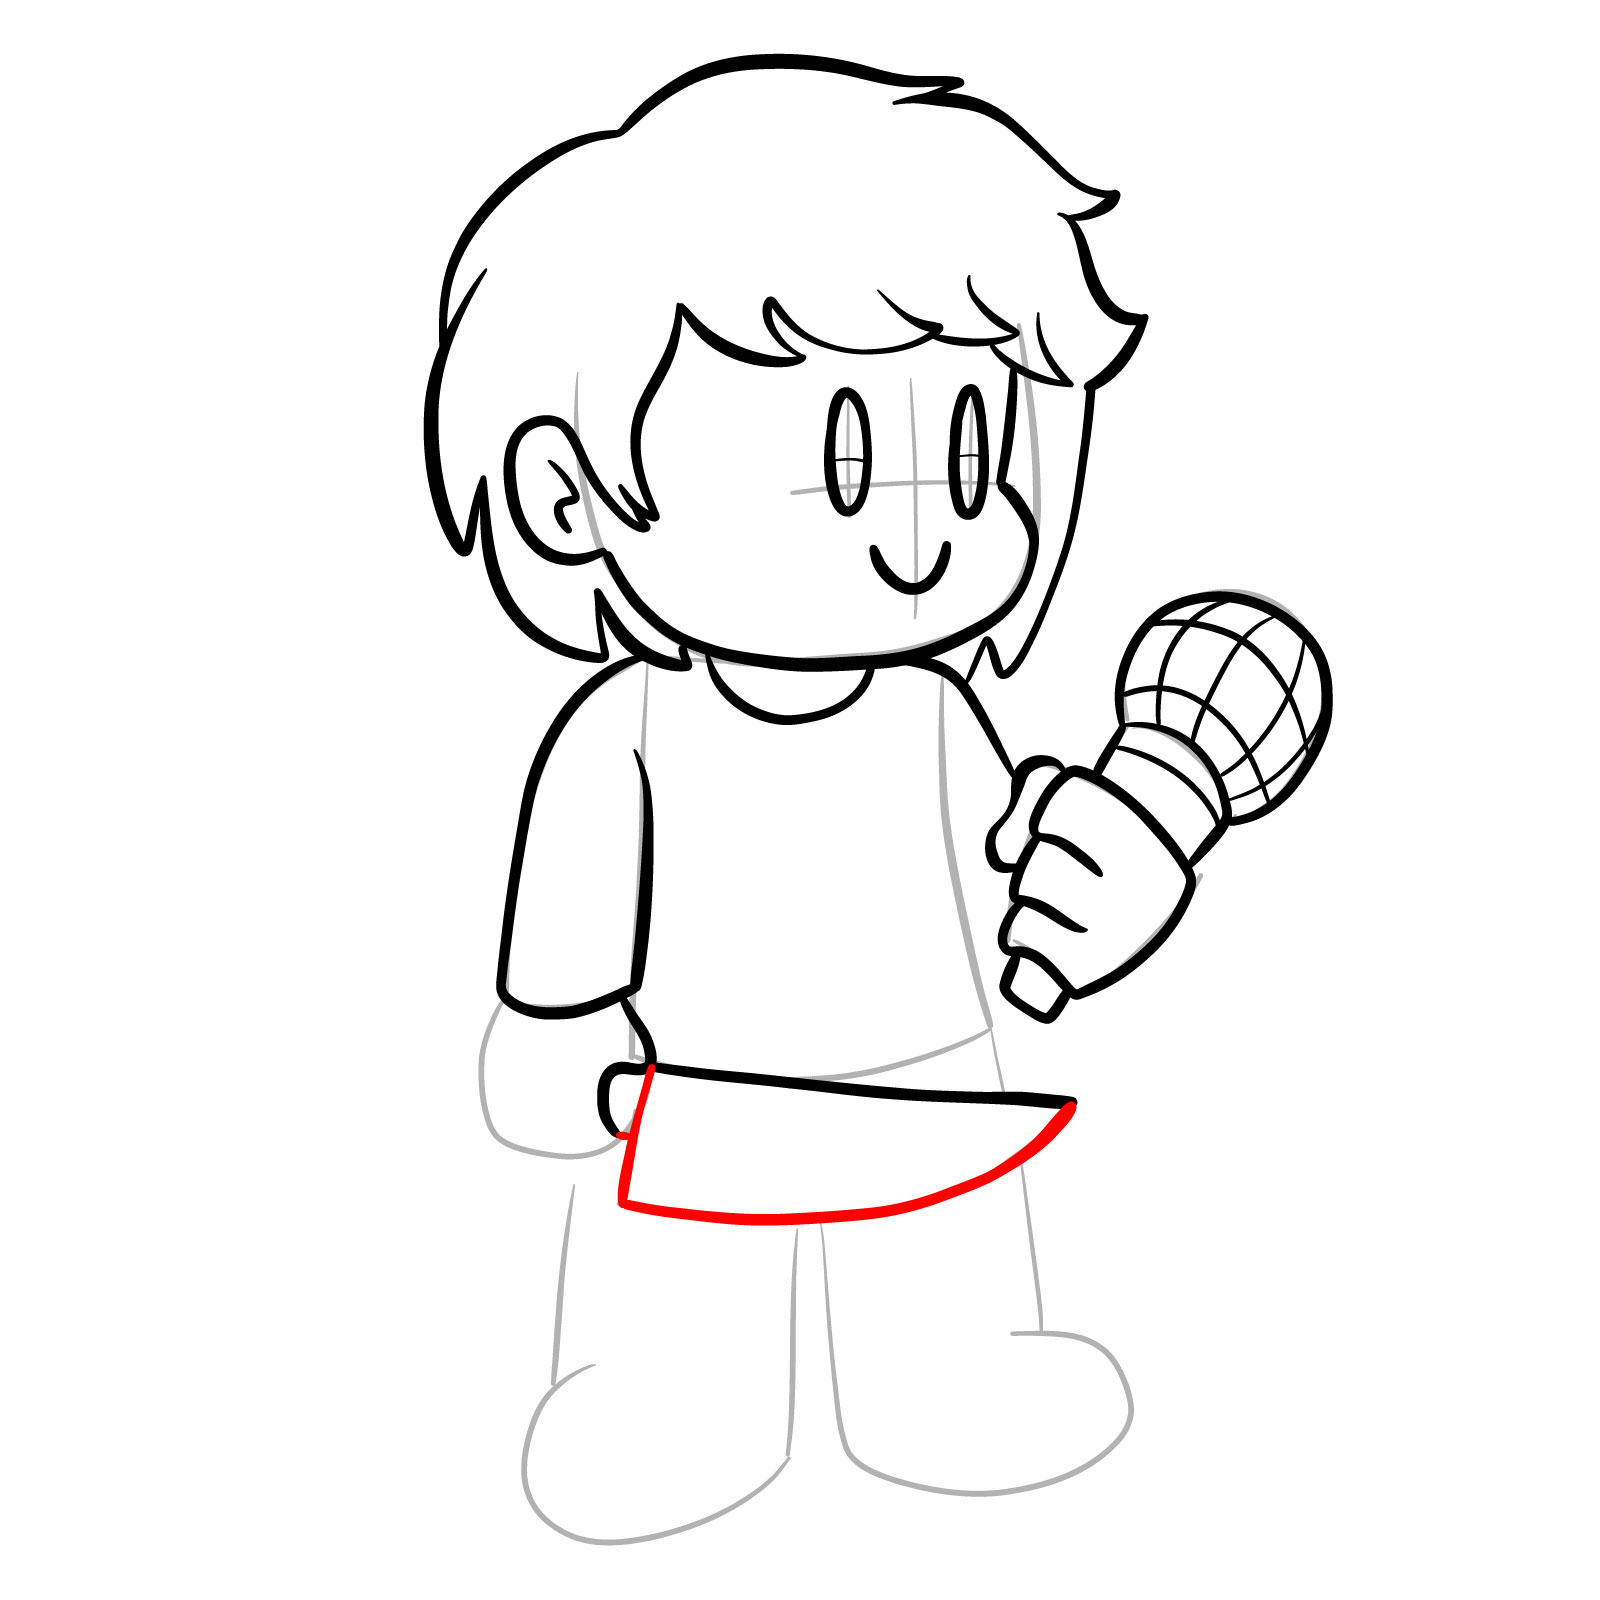 How to draw Chara from FNF - step 21